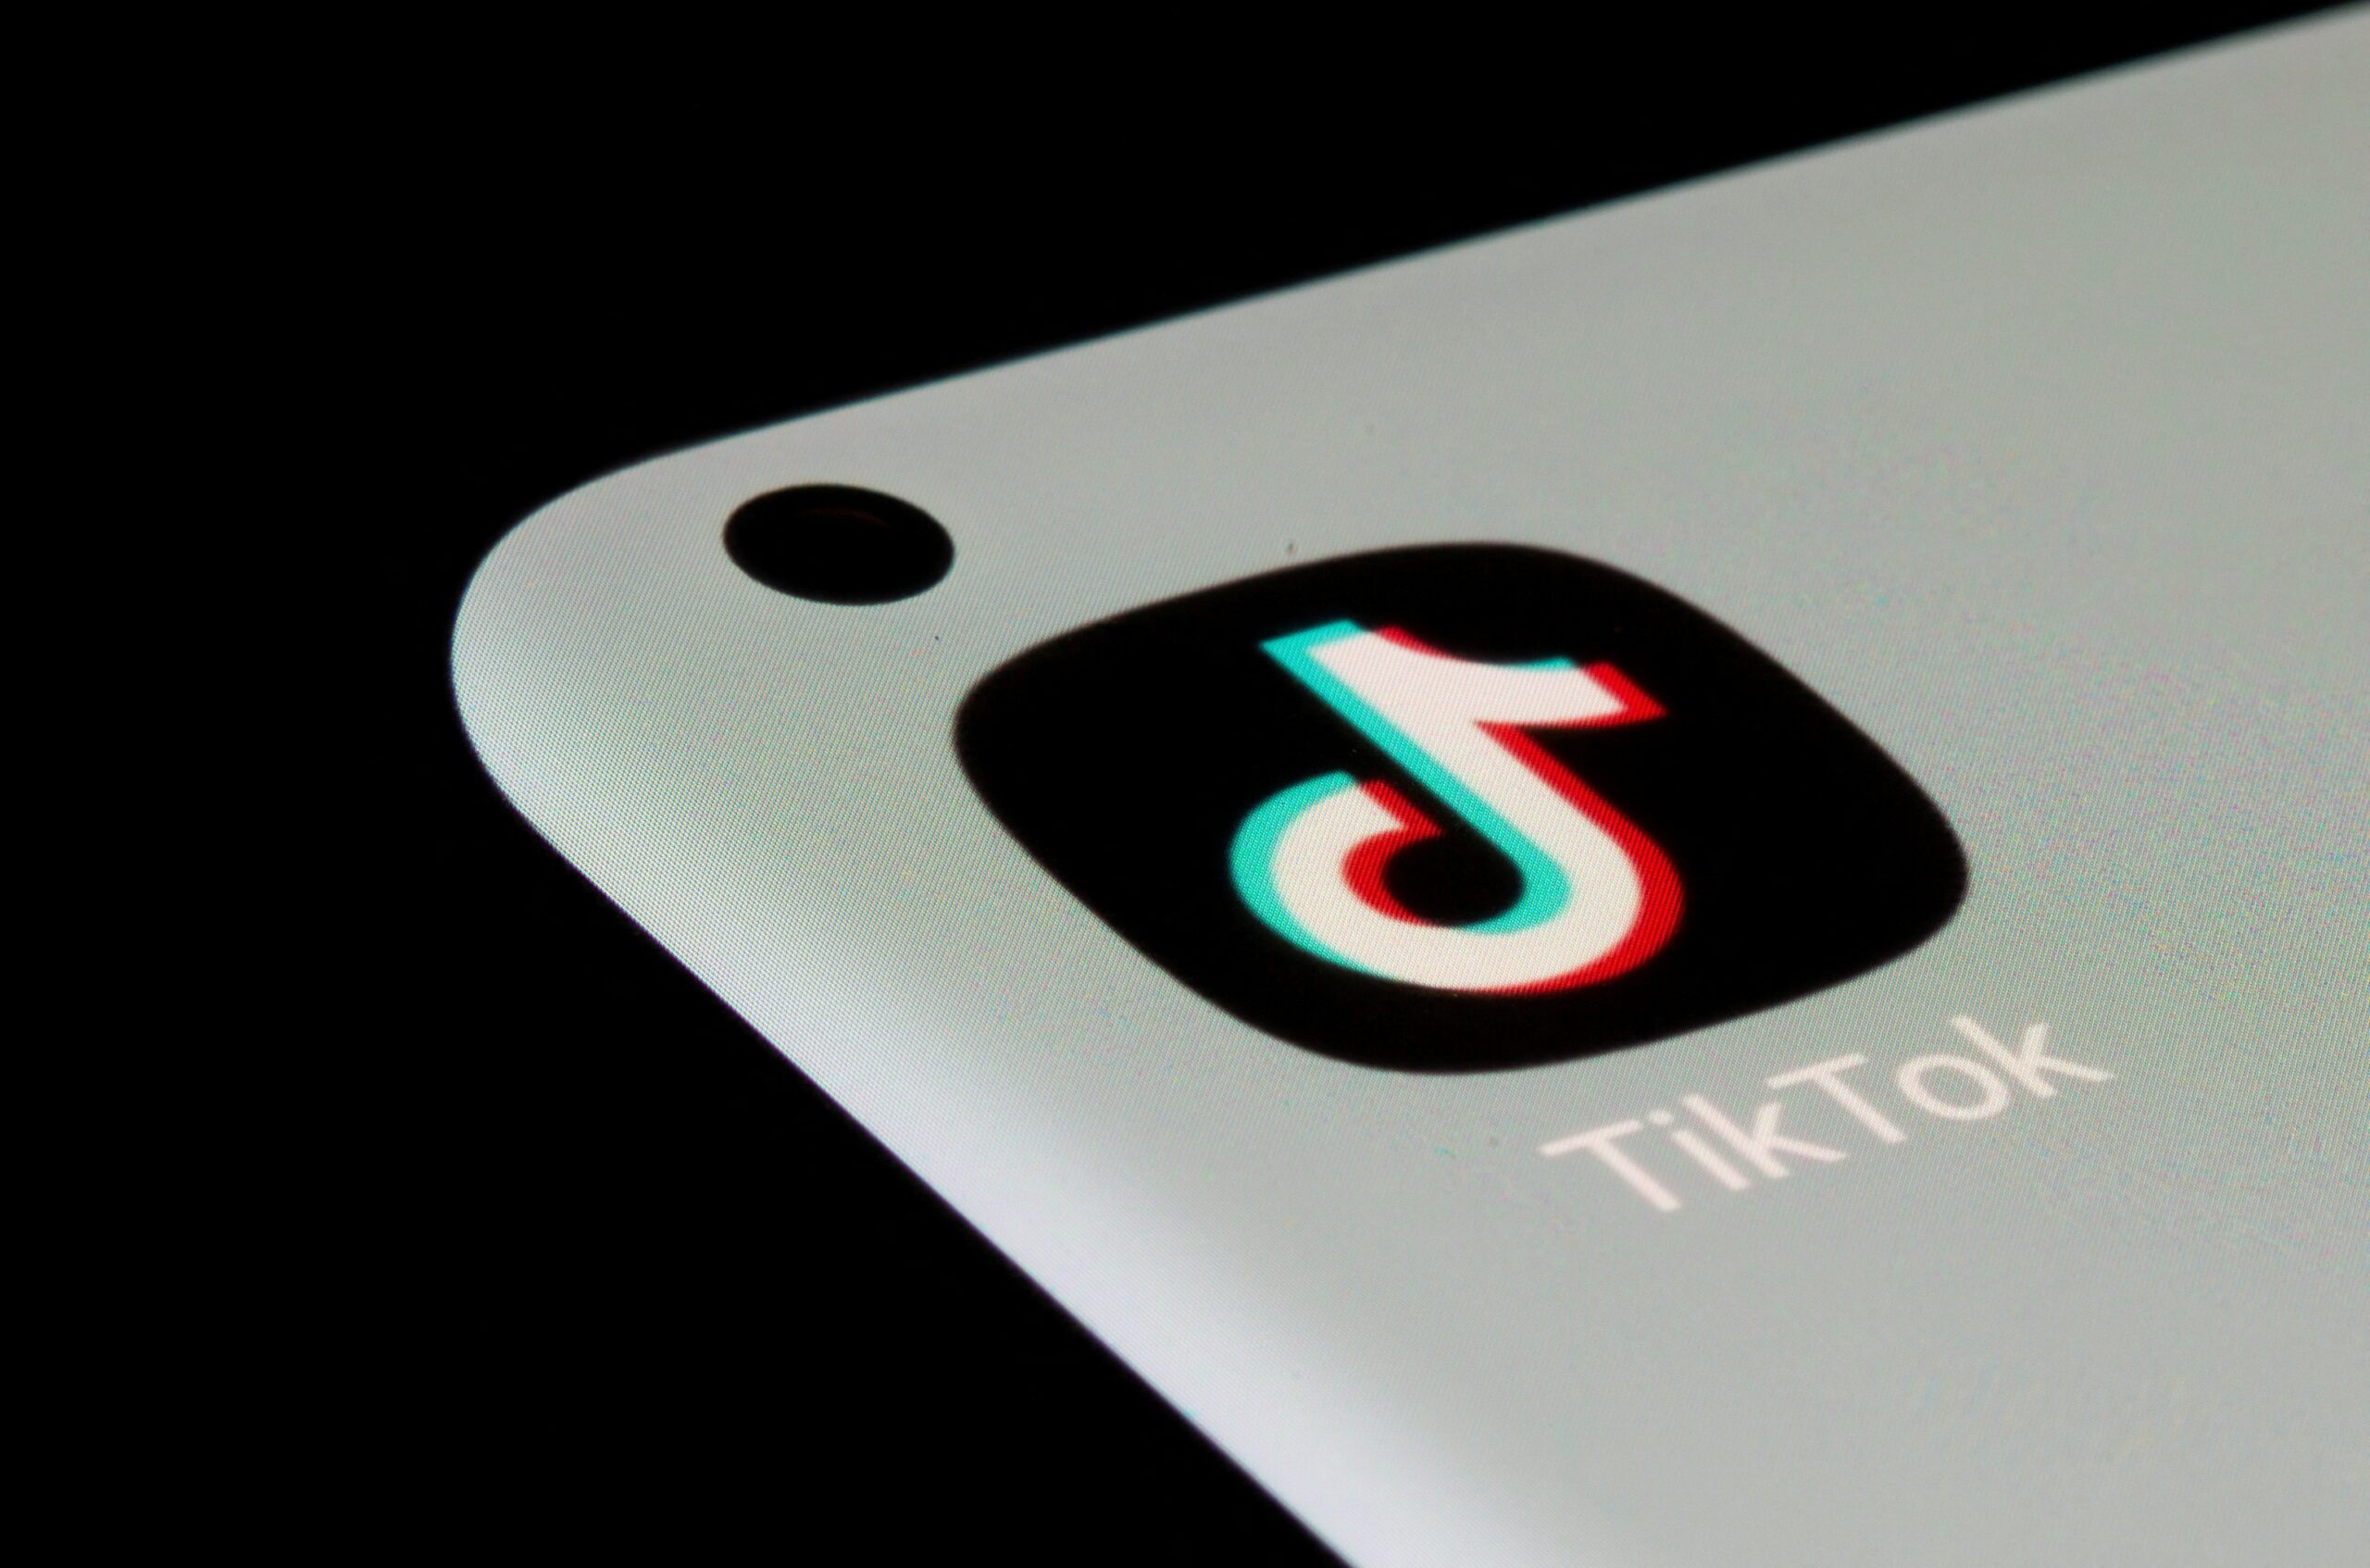 US House administration arm bans TikTok on official devices